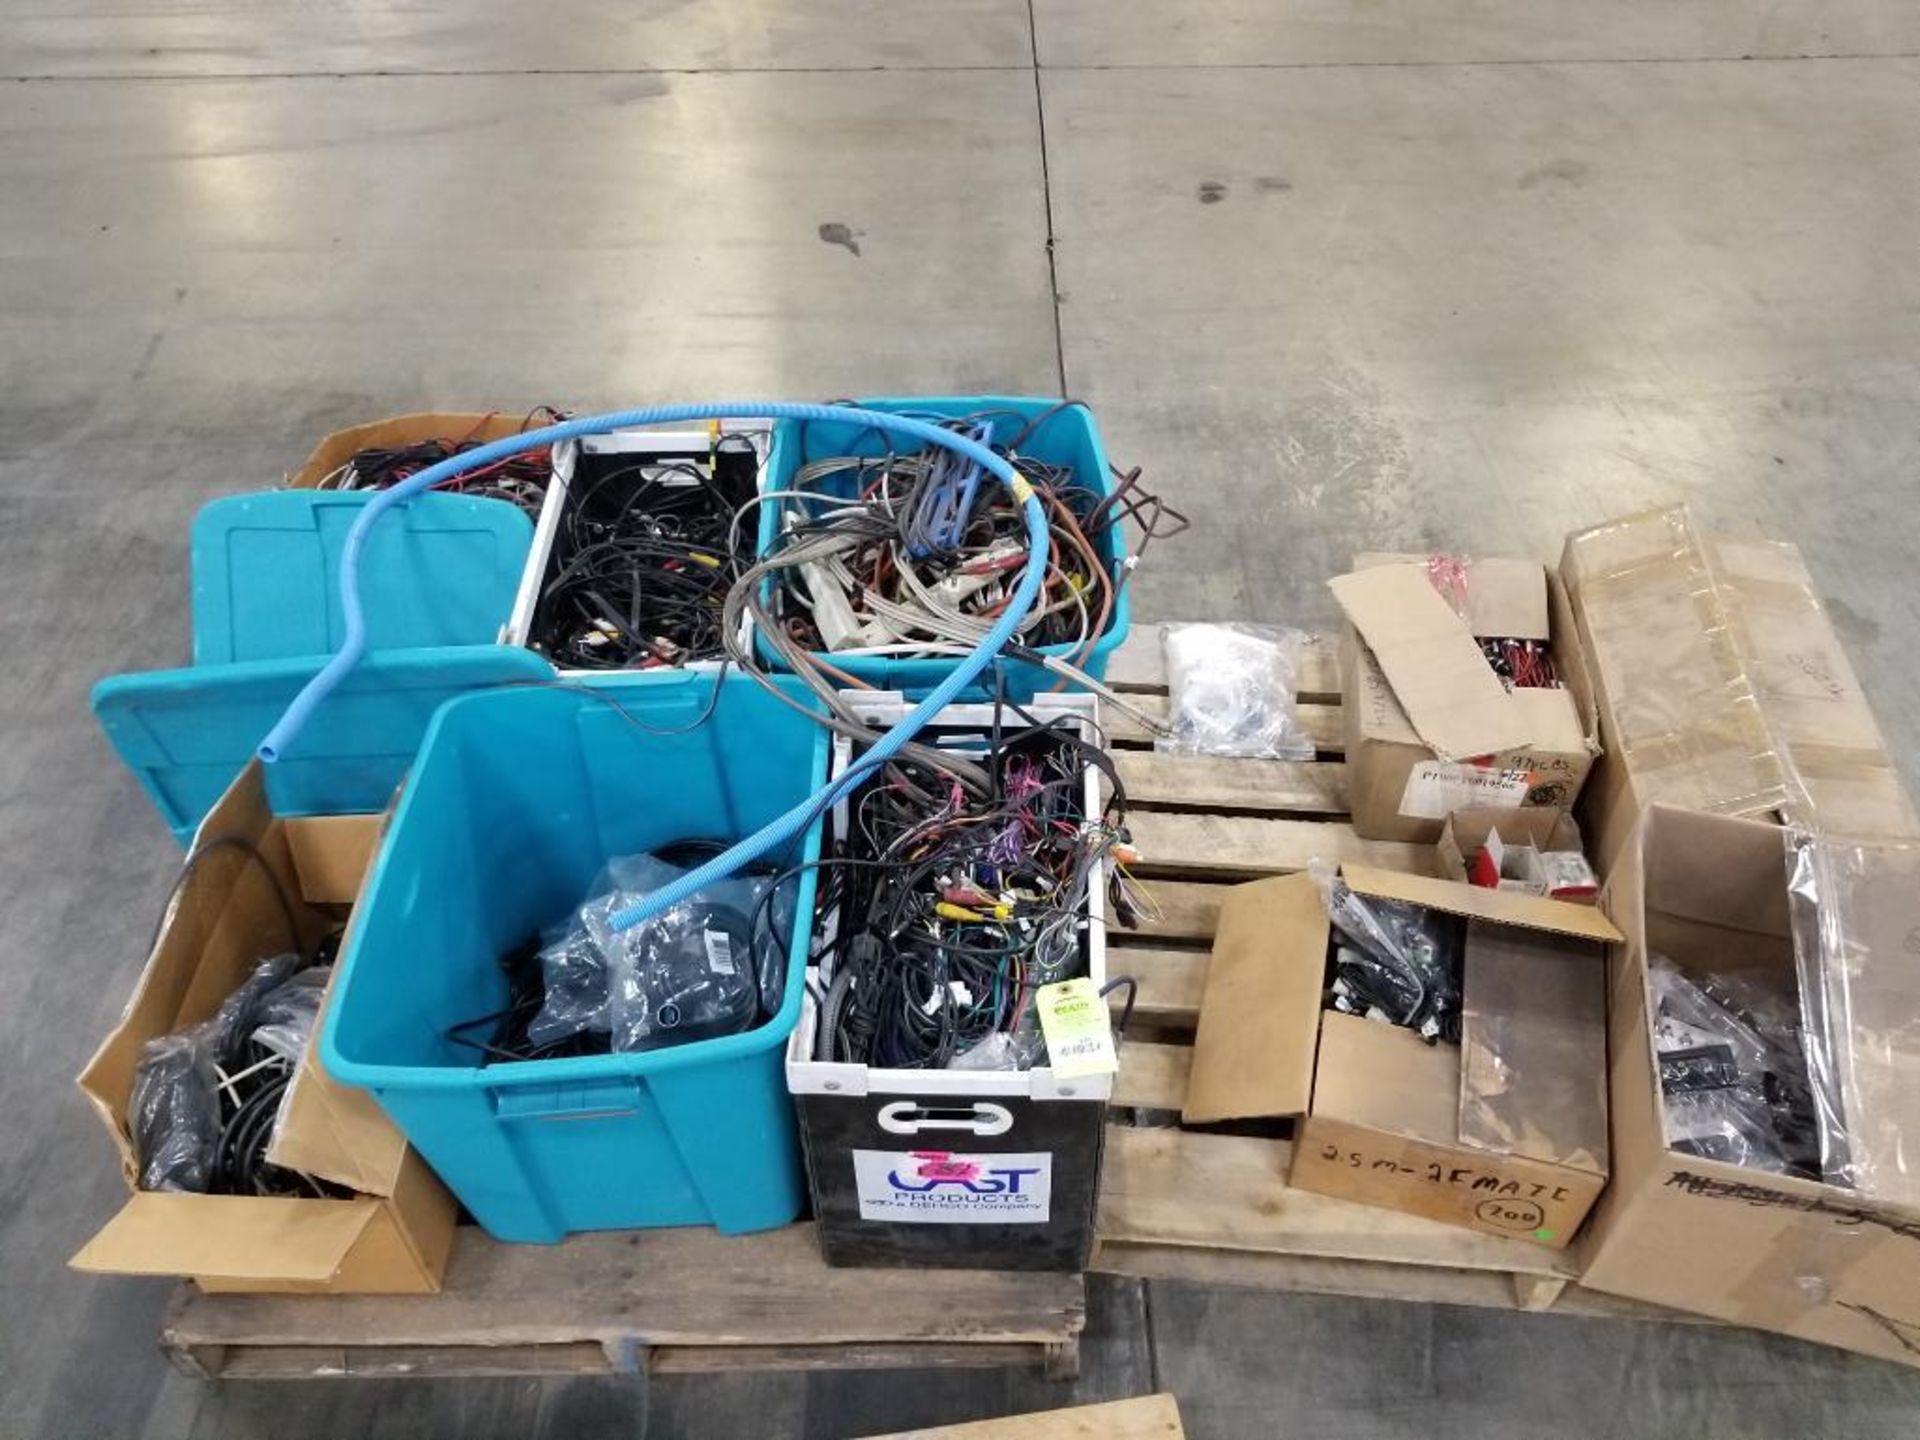 Large lot of assorted electrical and hardware equipment.